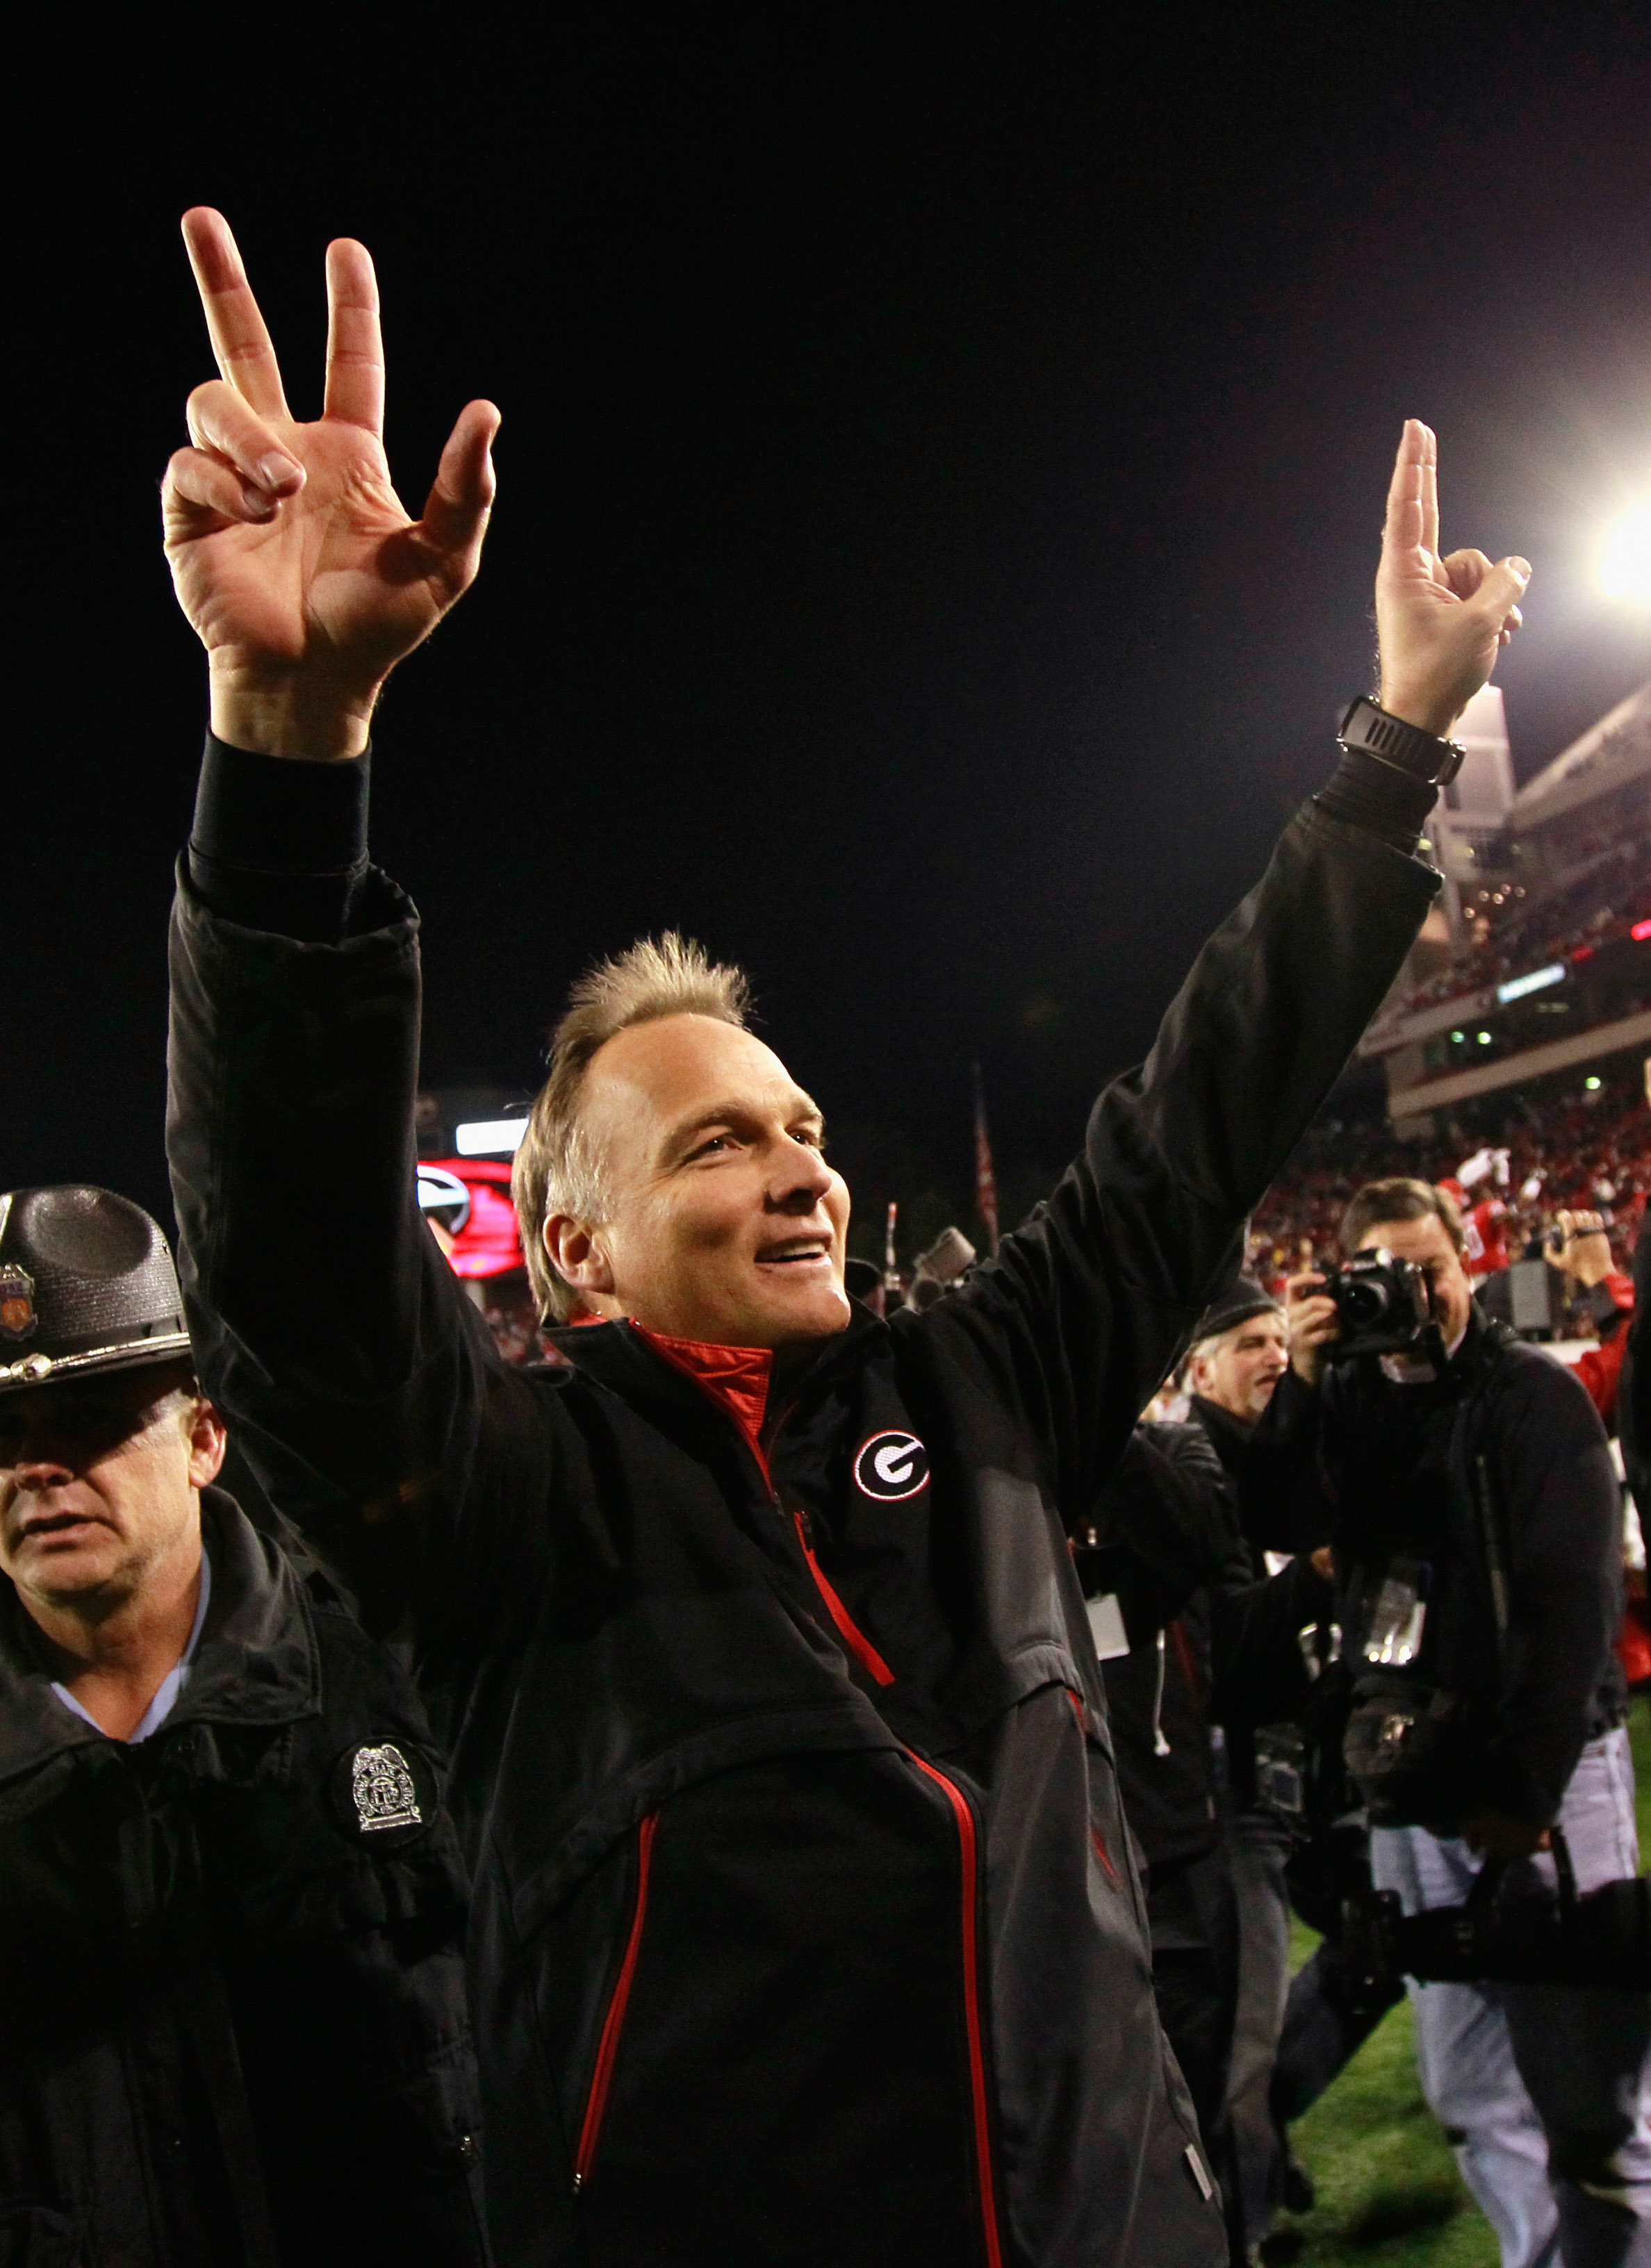 ATHENS, GA - NOVEMBER 27:  Head coach Mark Richt of the Georgia Bulldogs celebrates their 42-34 win over the Georgia Tech Yellow Jackets at Sanford Stadium on November 27, 2010 in Athens, Georgia.  (Photo by Kevin C. Cox/Getty Images)